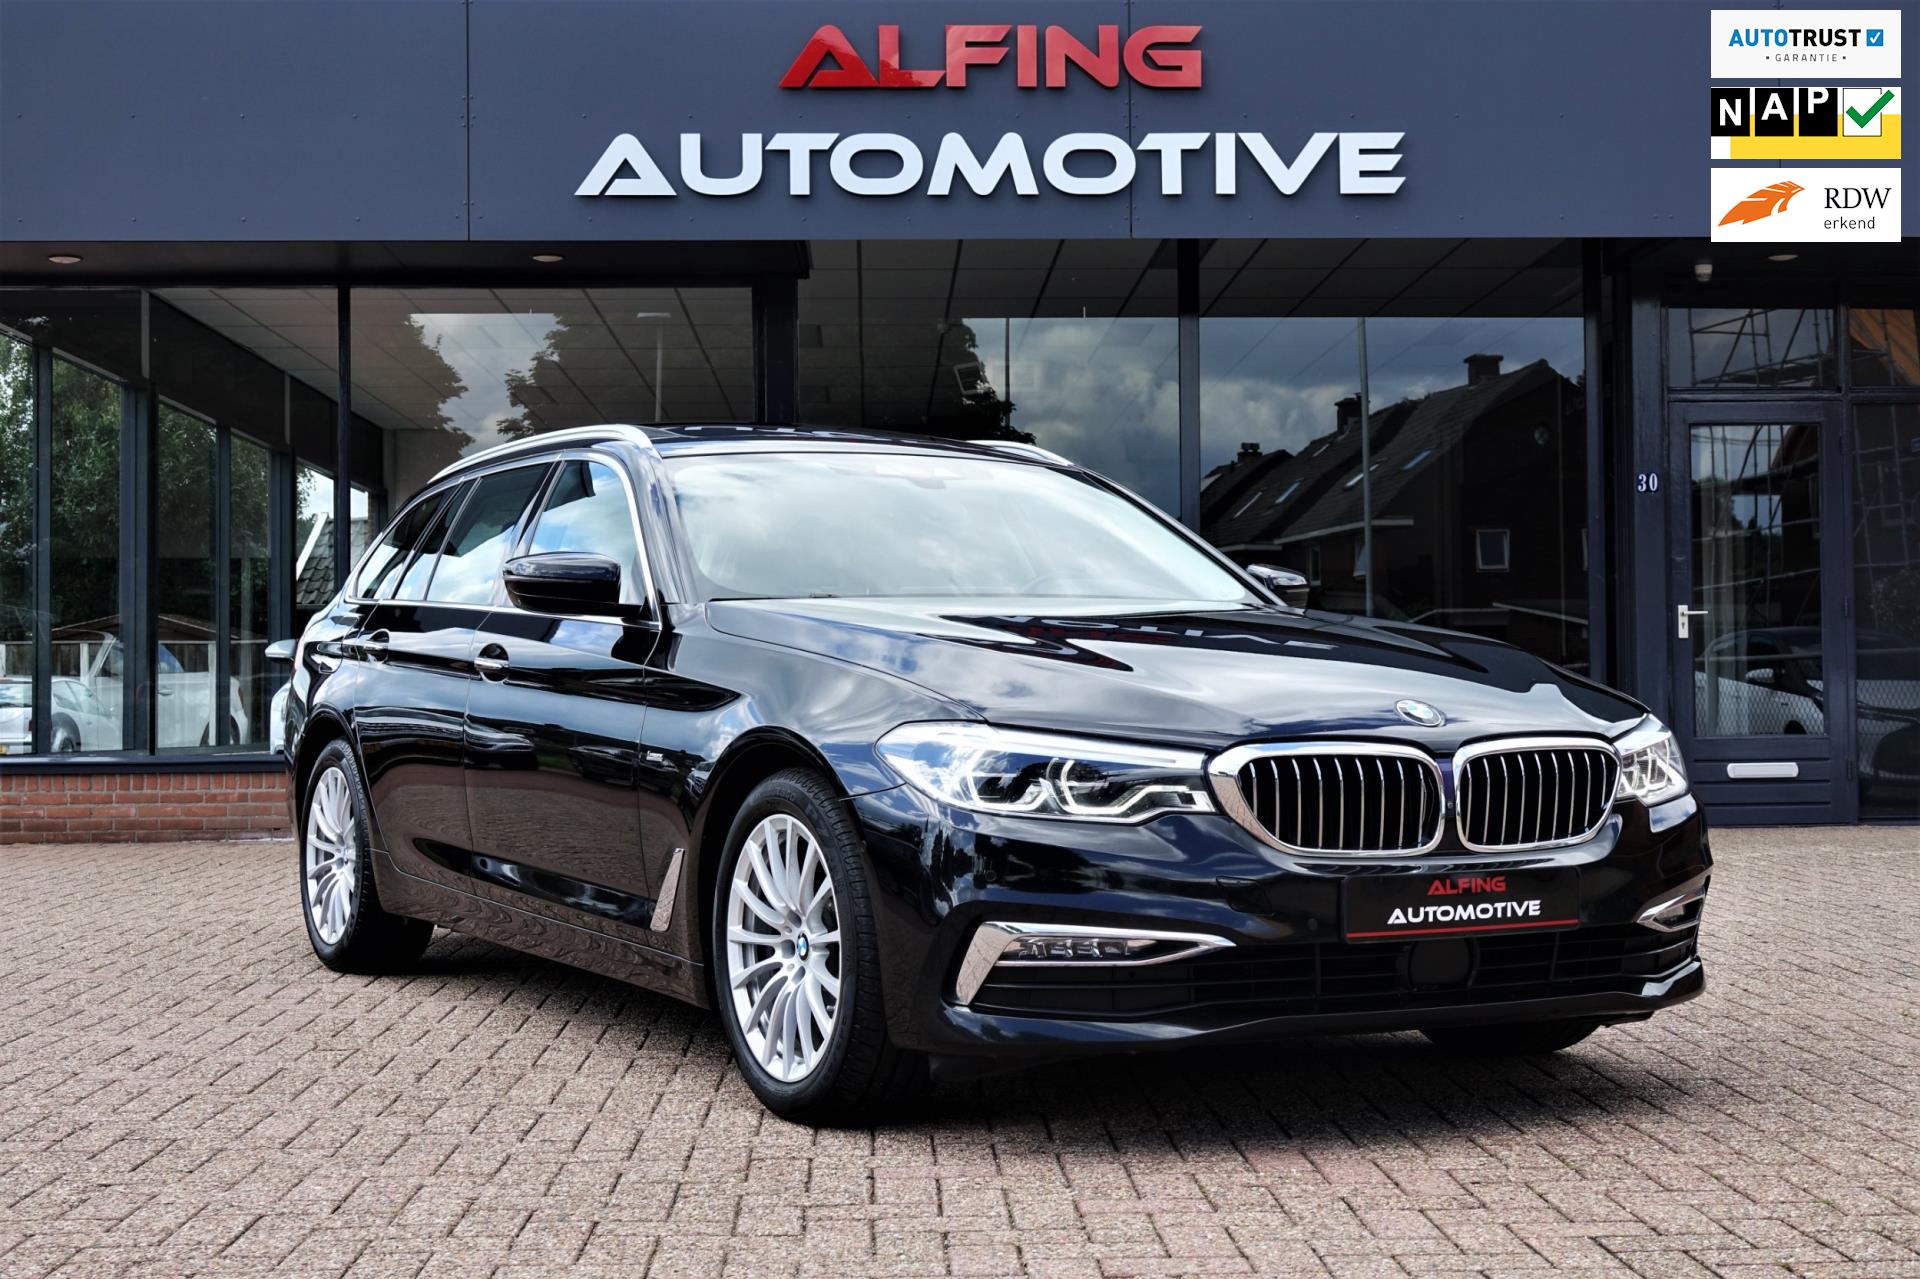 BMW 5-serie Touring occasion - Alfing Automotive